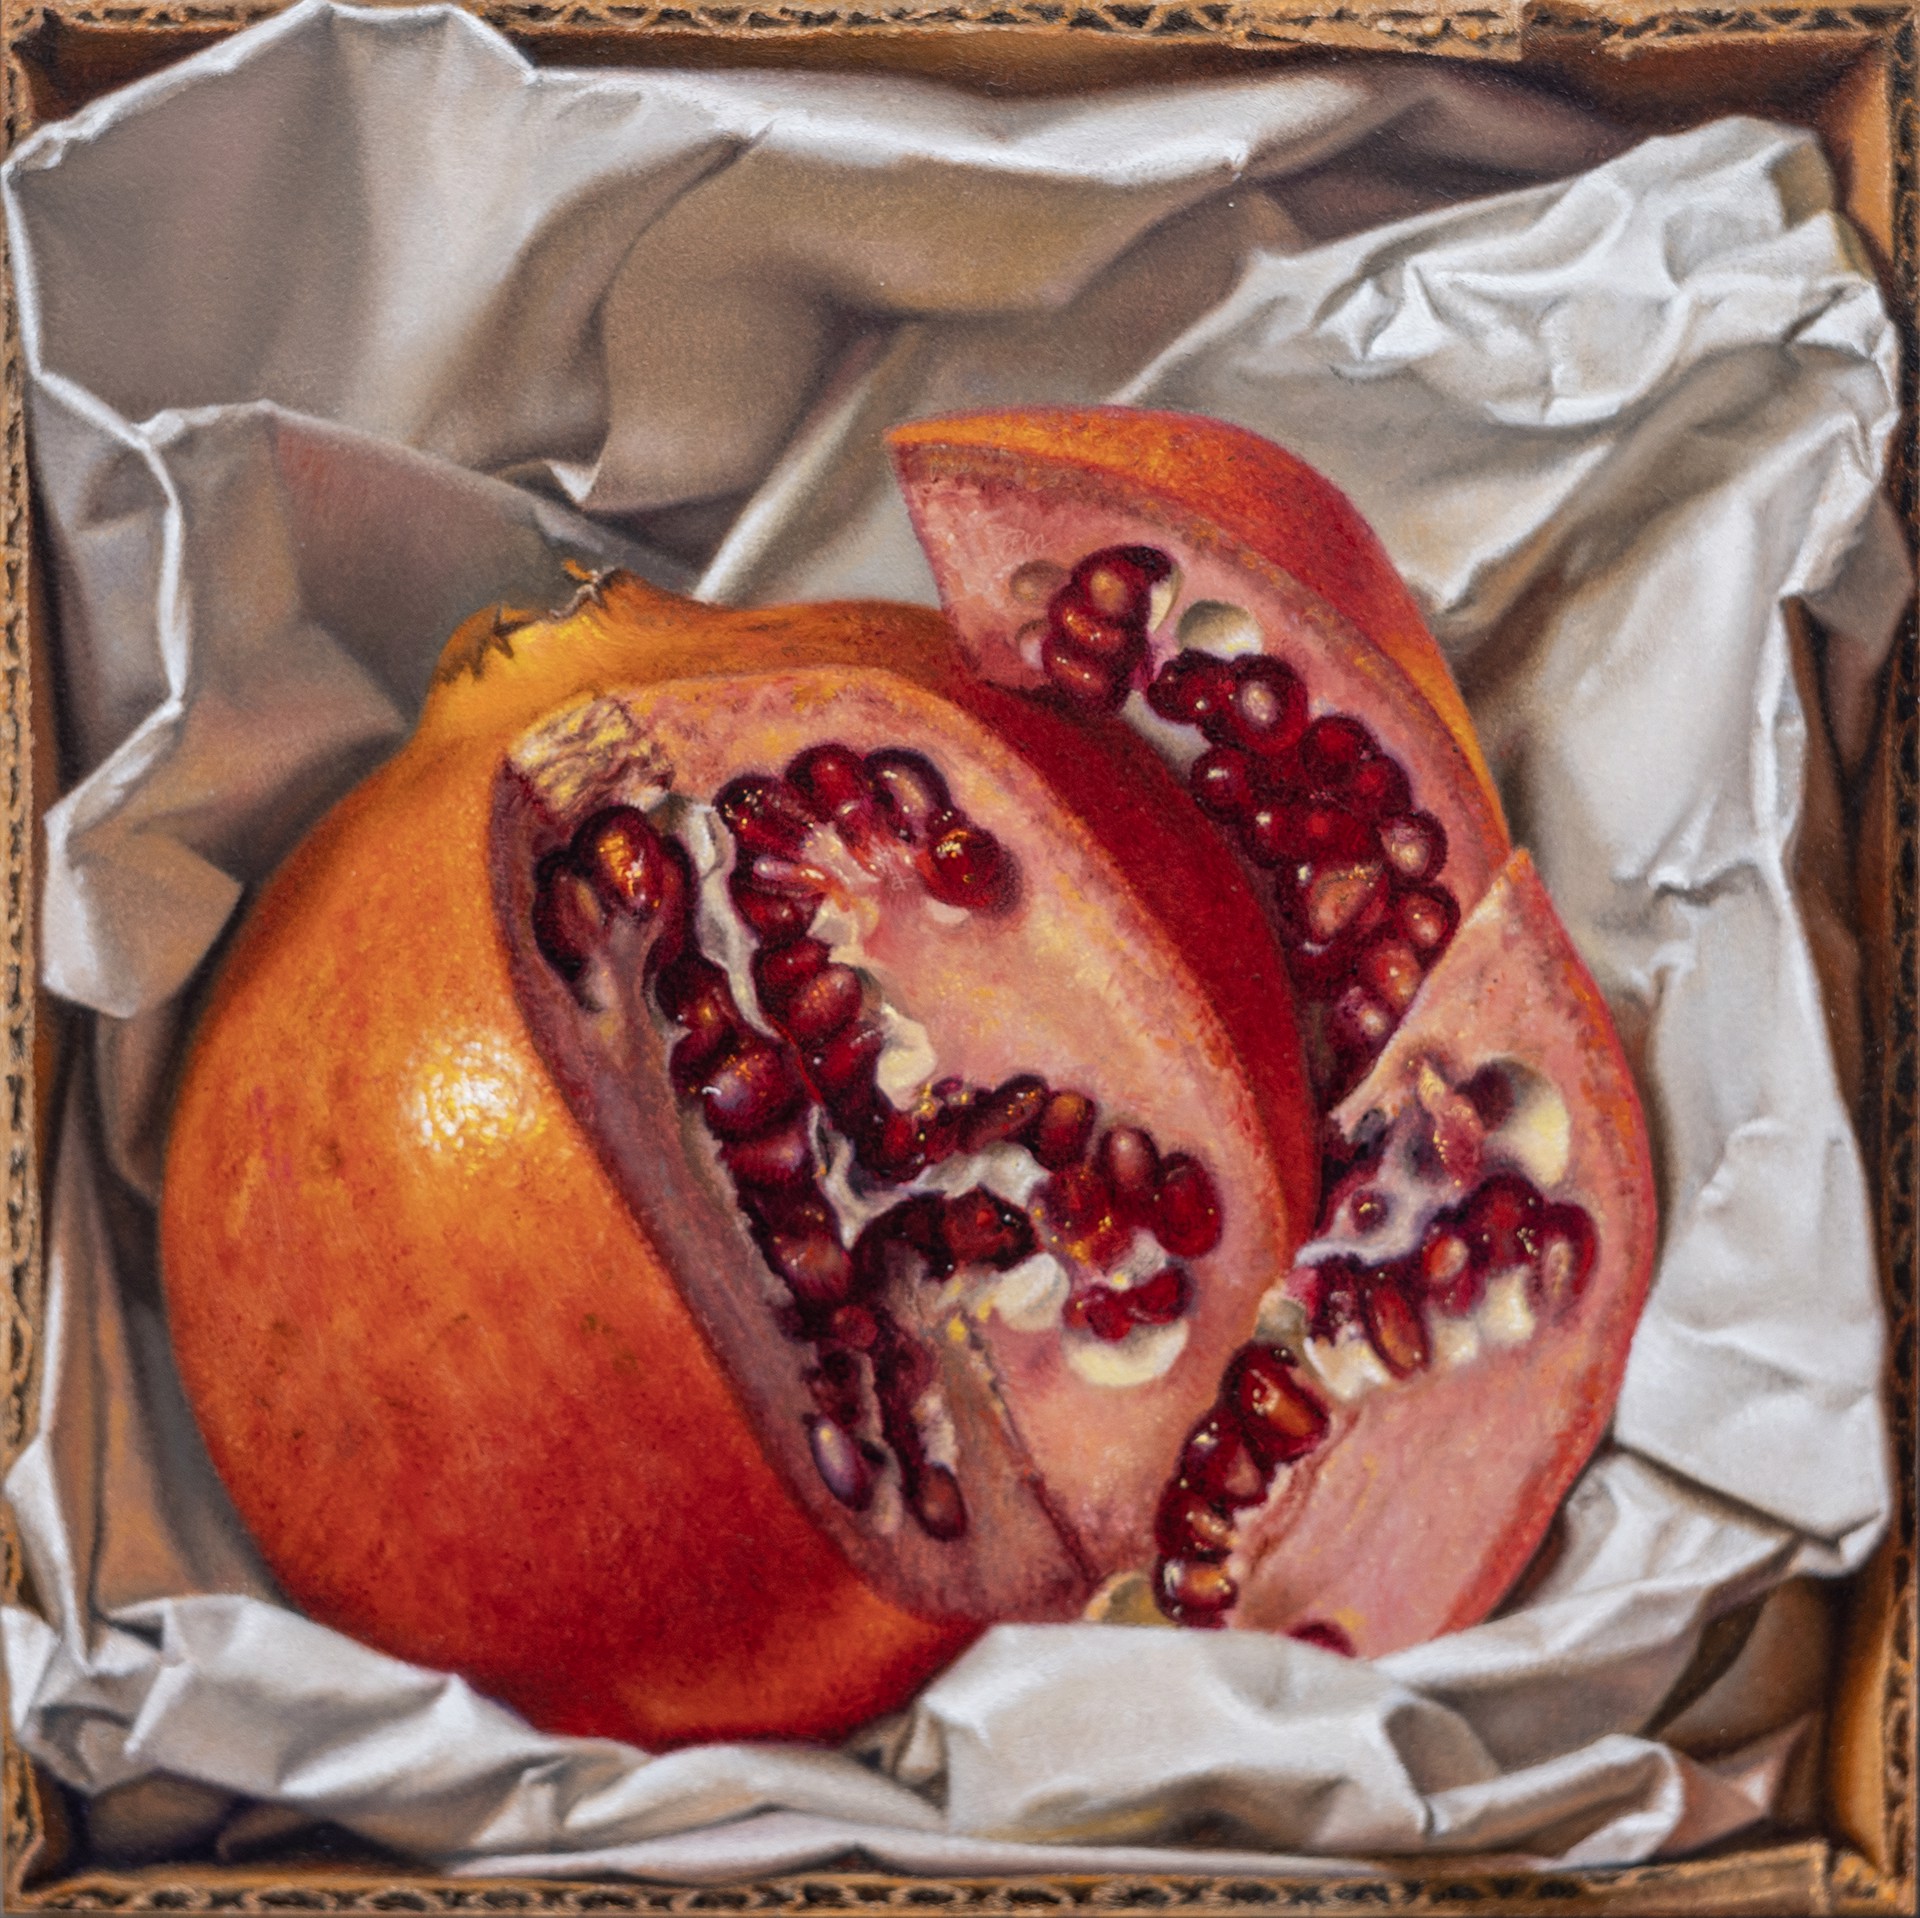 Pomegranate by Natalie Featherston